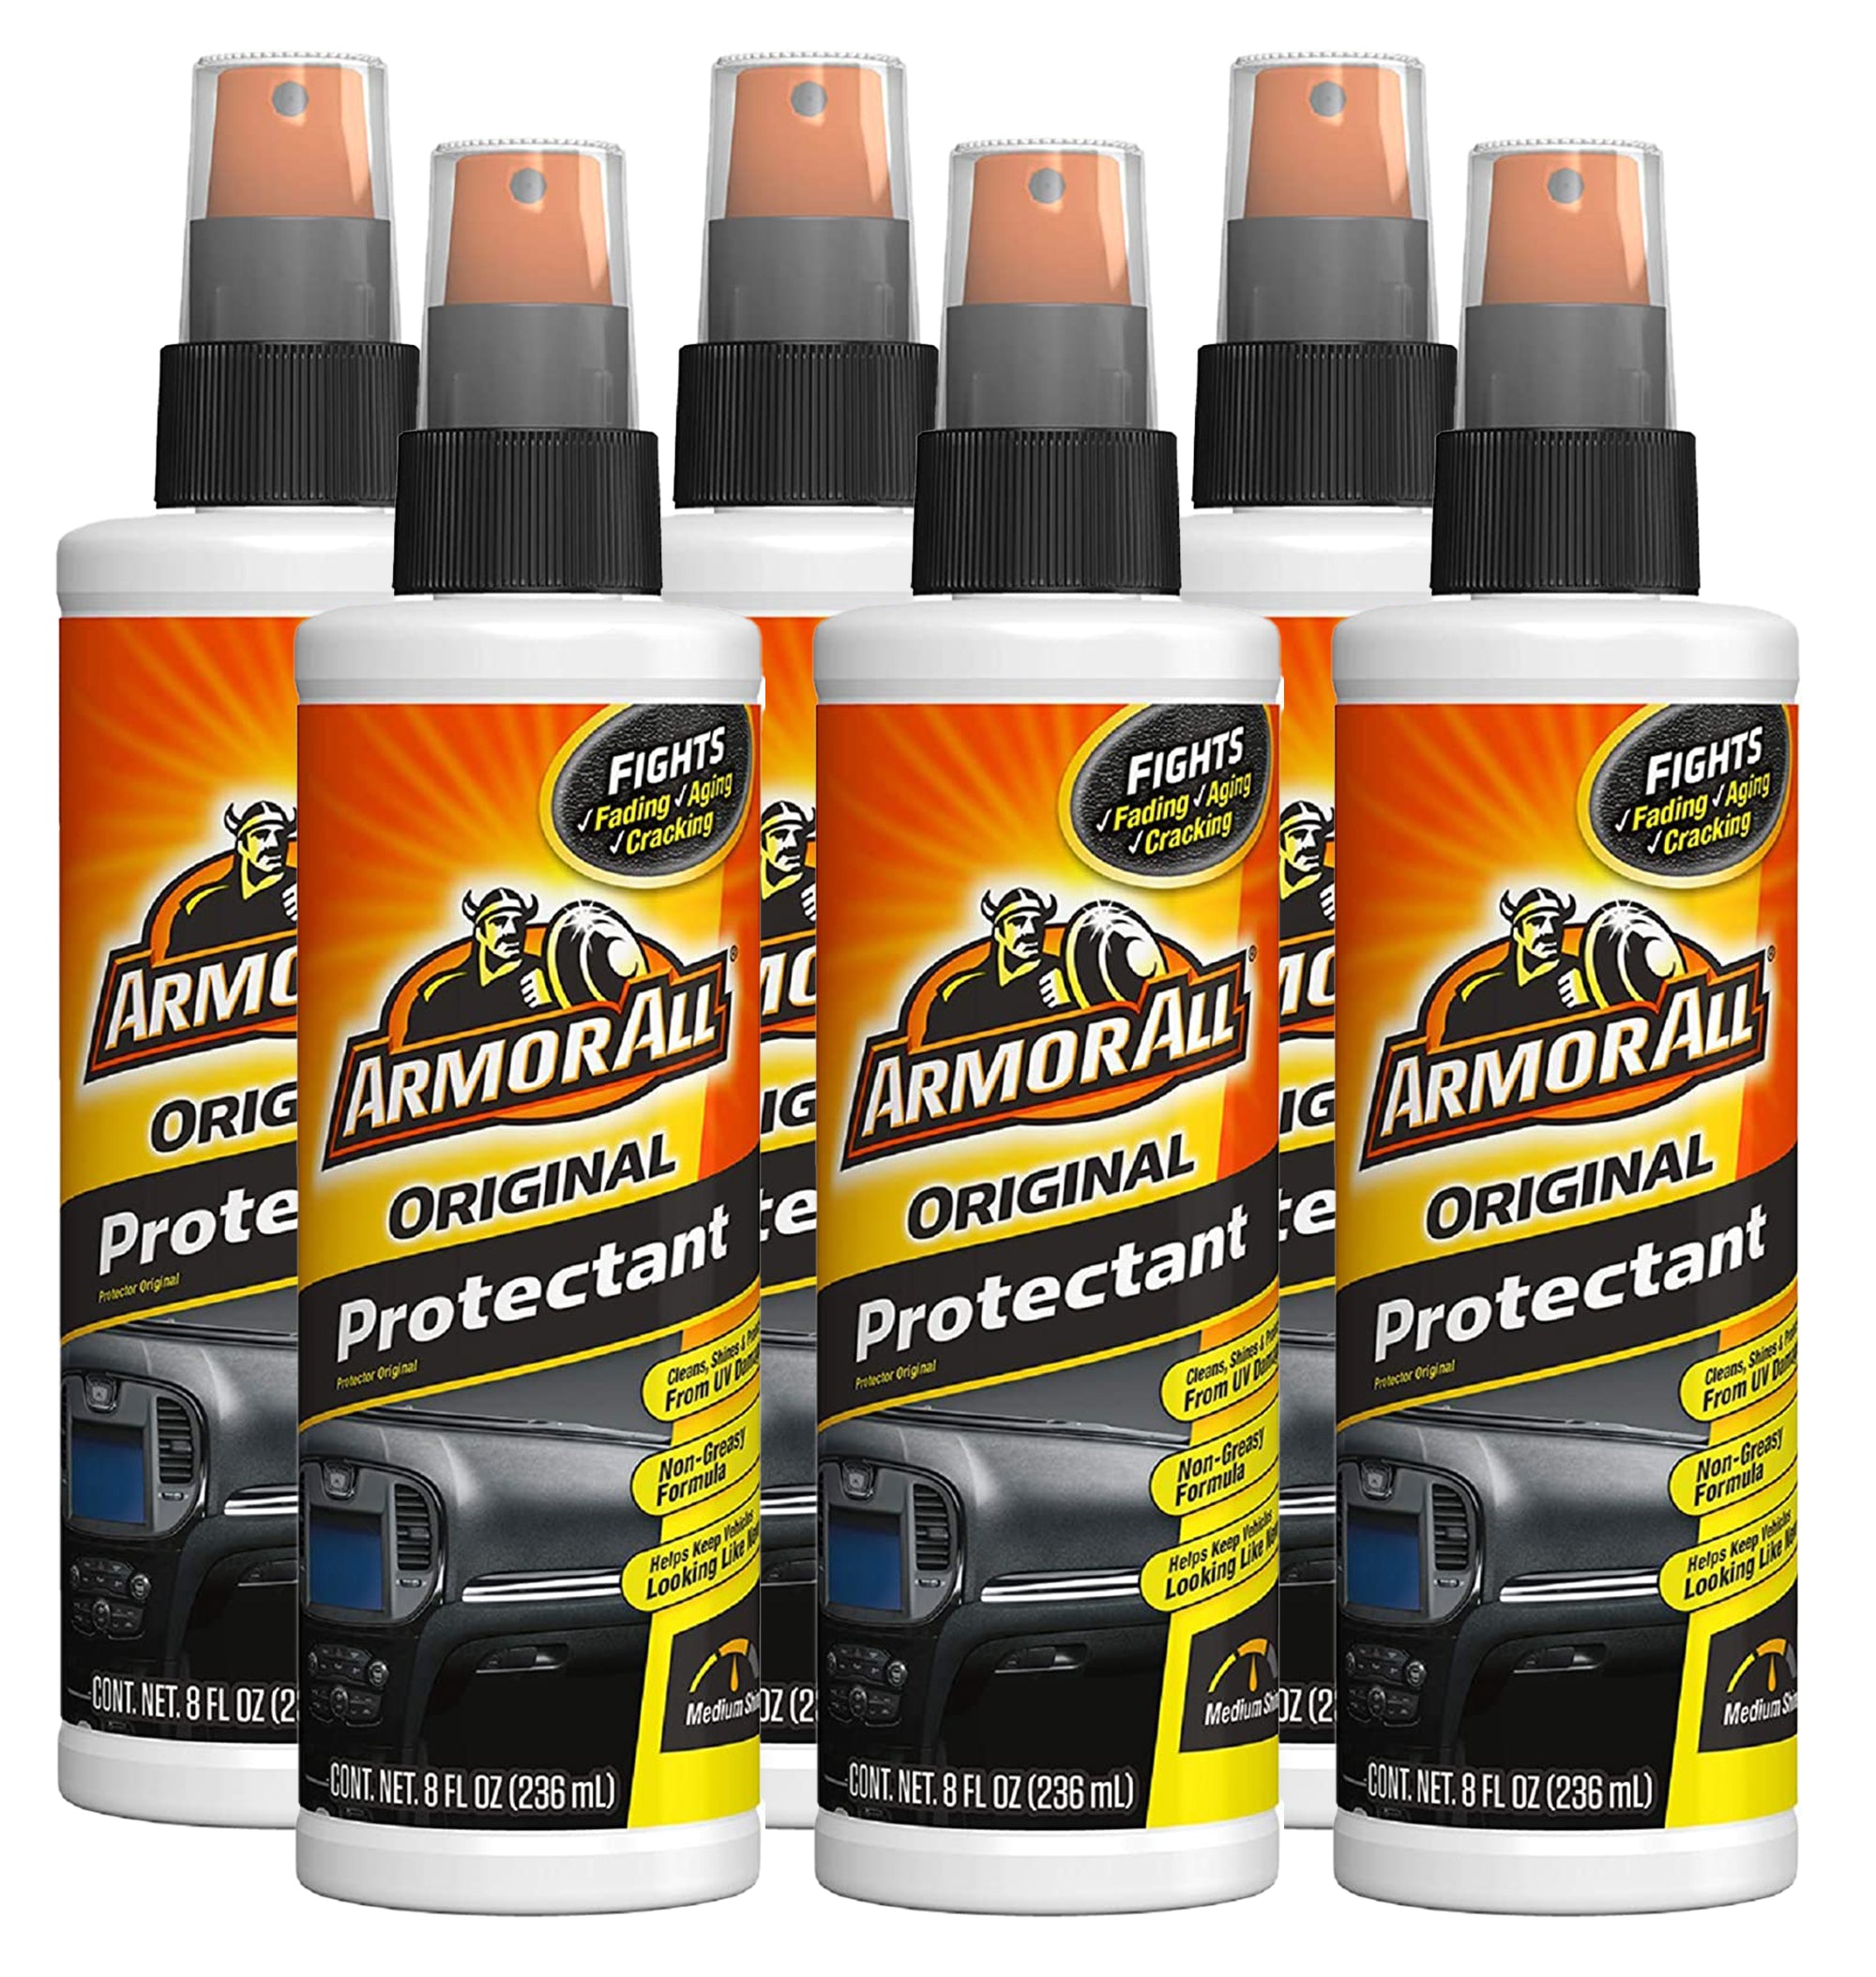 Armor All 78175 Leather Care Protectant - 16 oz. Bottle, (Pack of 6)